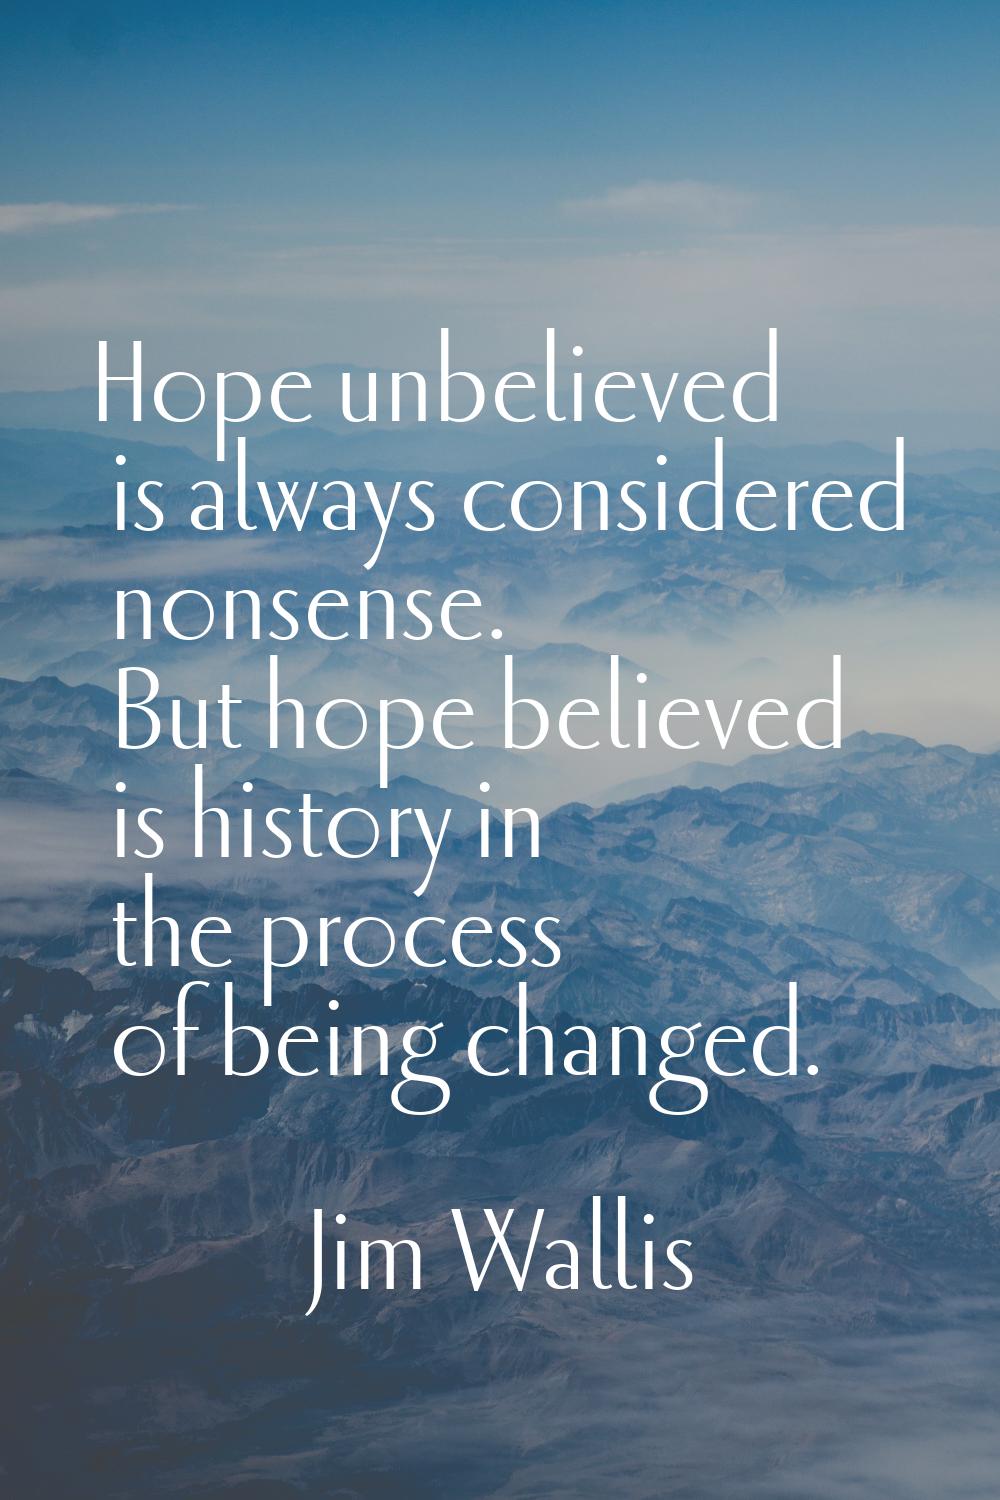 Hope unbelieved is always considered nonsense. But hope believed is history in the process of being